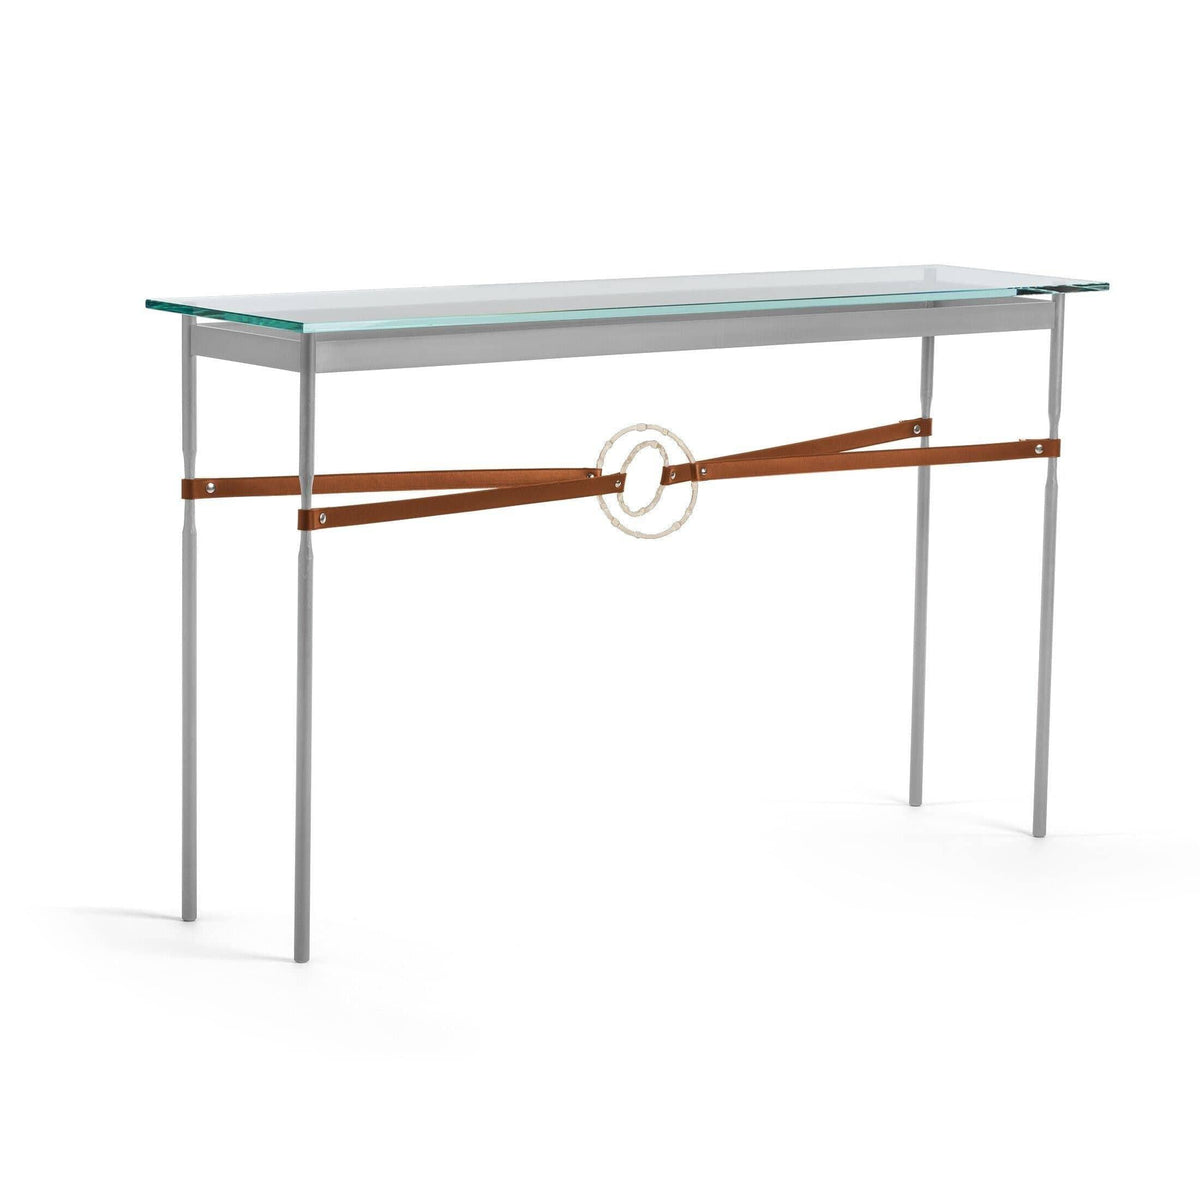 Hubbardton Forge - Equus Chestnut Leather Console Table - 750118-82-84-LC-VA0714 | Montreal Lighting & Hardware